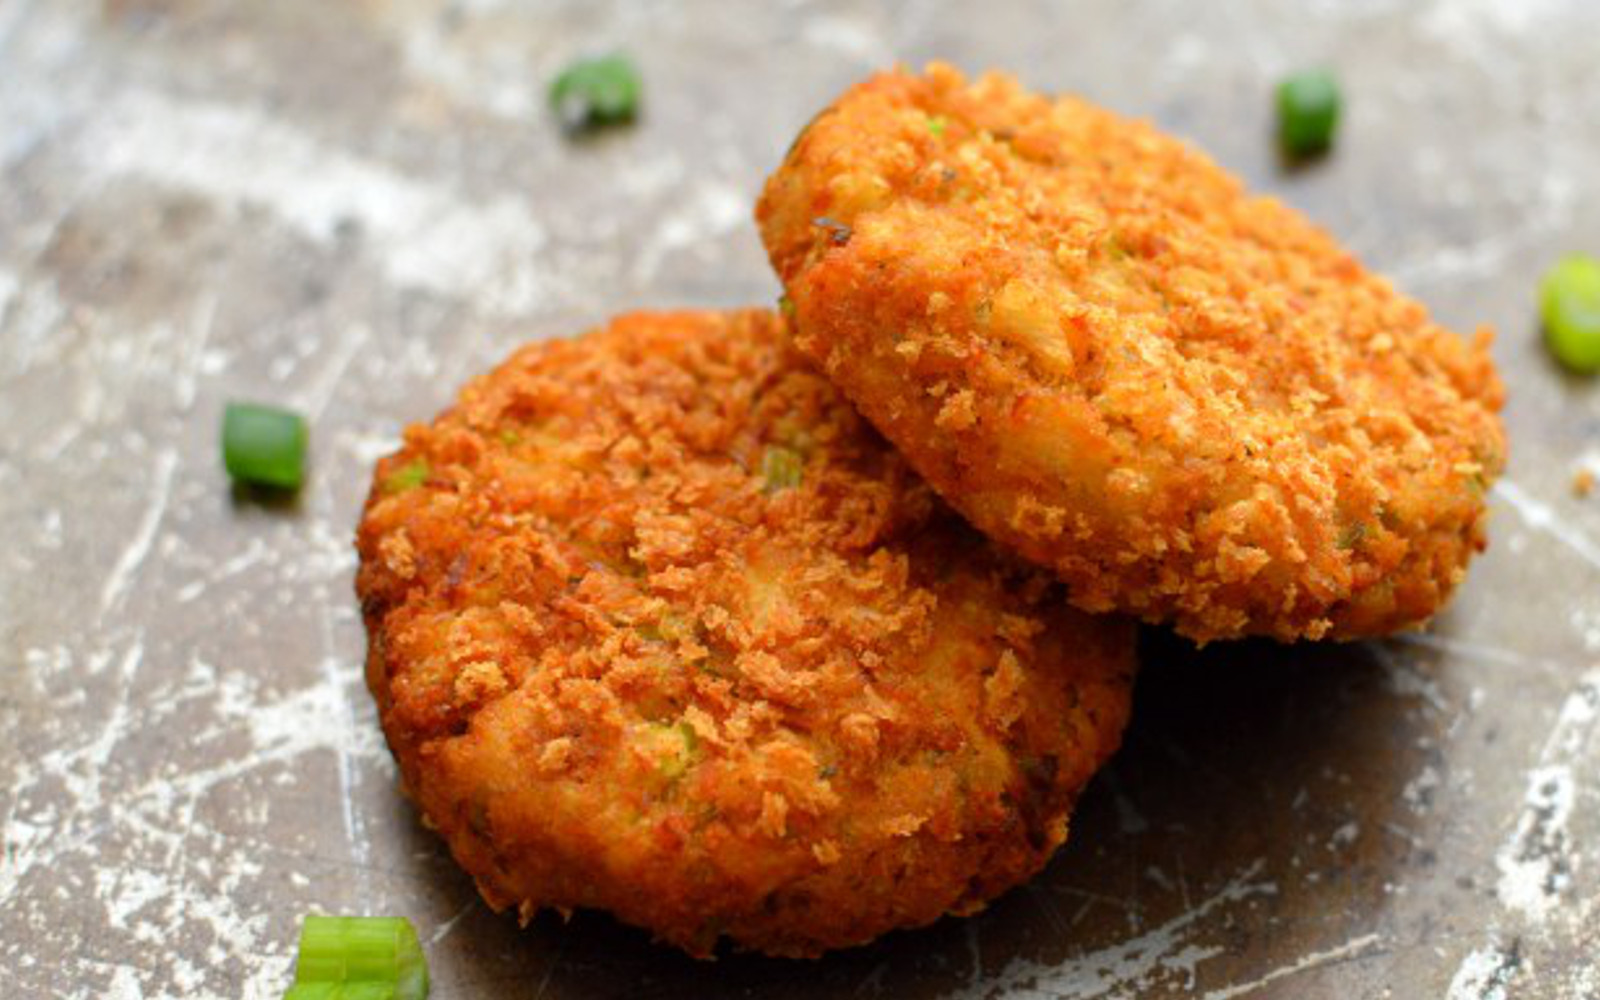 Vegan Fried Hearts of Palm ‘Crab’ Cakes